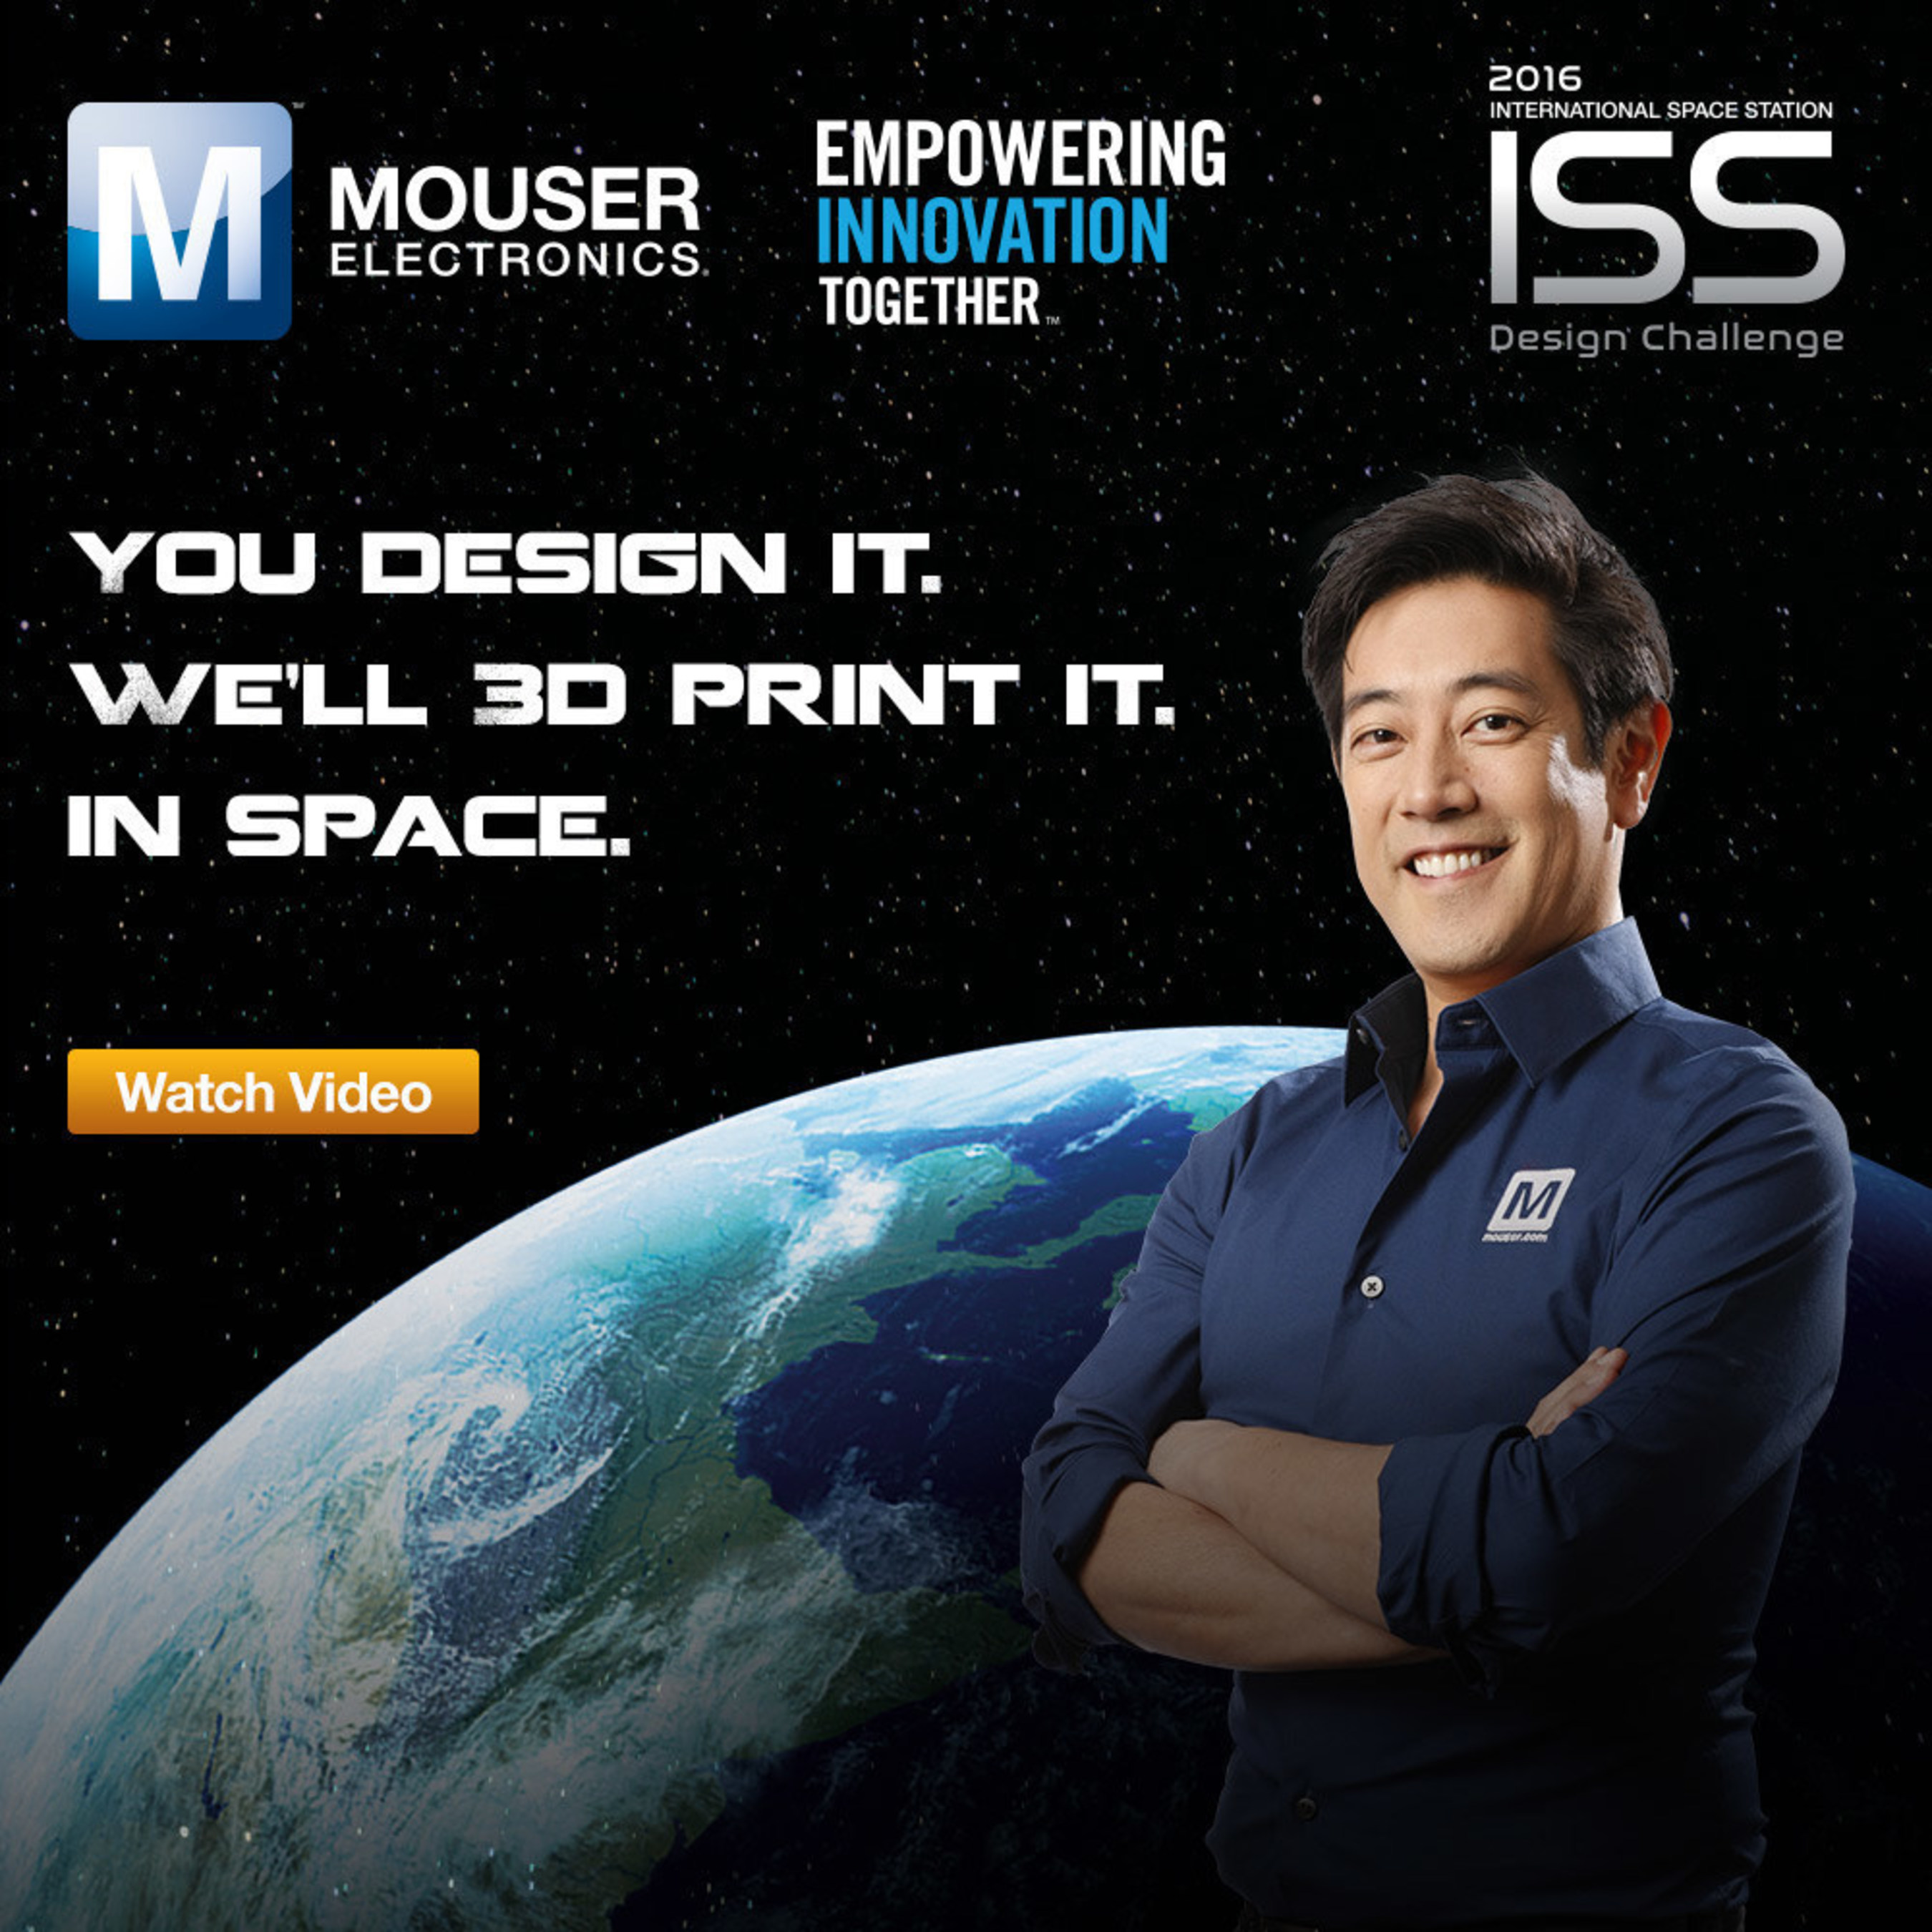 Mouser and Grant are teaming up for the I.S.S. Design Challenge, part of the Empowering Innovation Together(TM) program. This new challenge calls for designs that will help I.S.S. astronauts, with the winning design 3D-printed aboard the I.S.S.